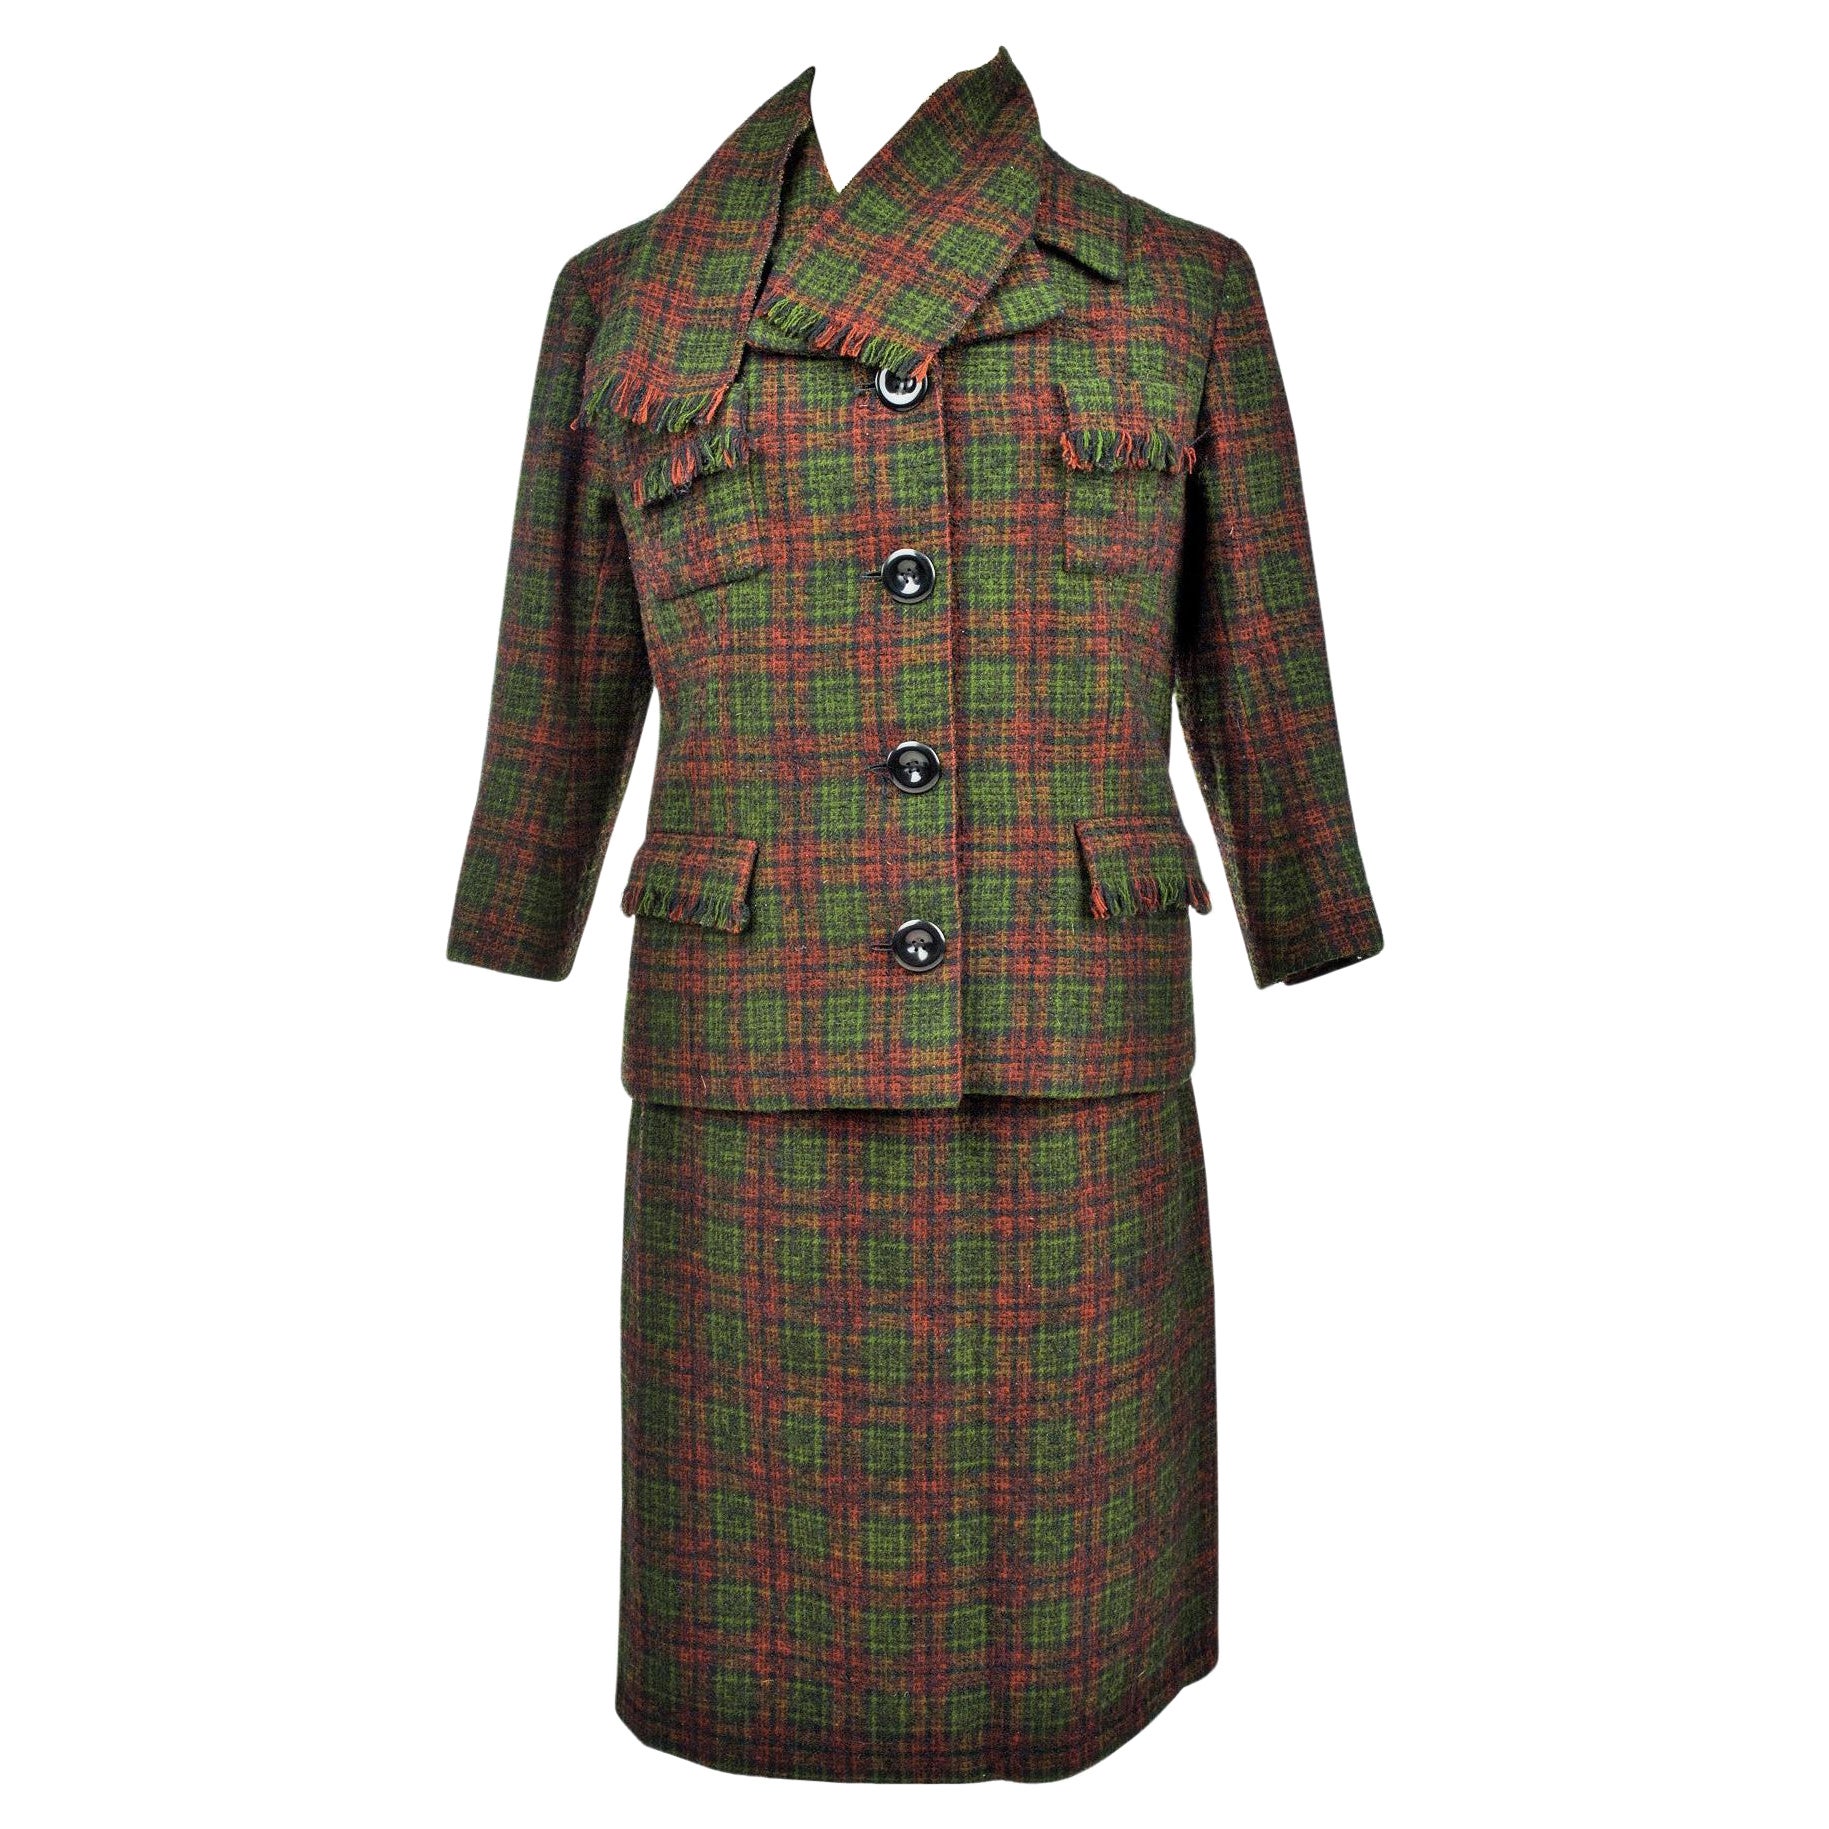 A French Bérénice skirt suit in Woll tartan / Dior pattern - France Circa 1970